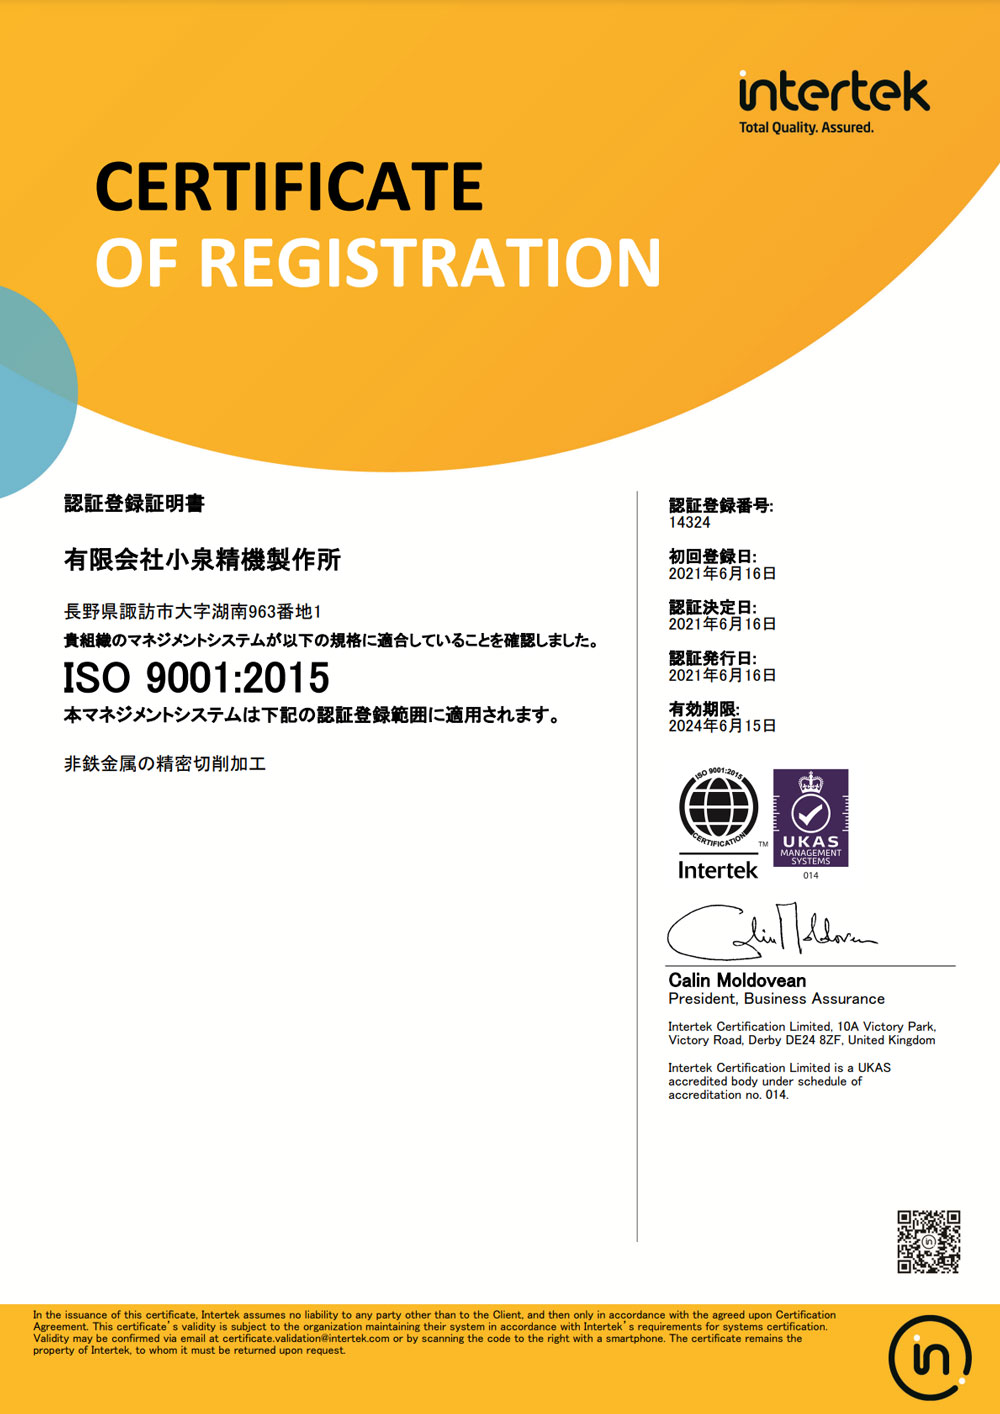 ISO9001認証登録証明書